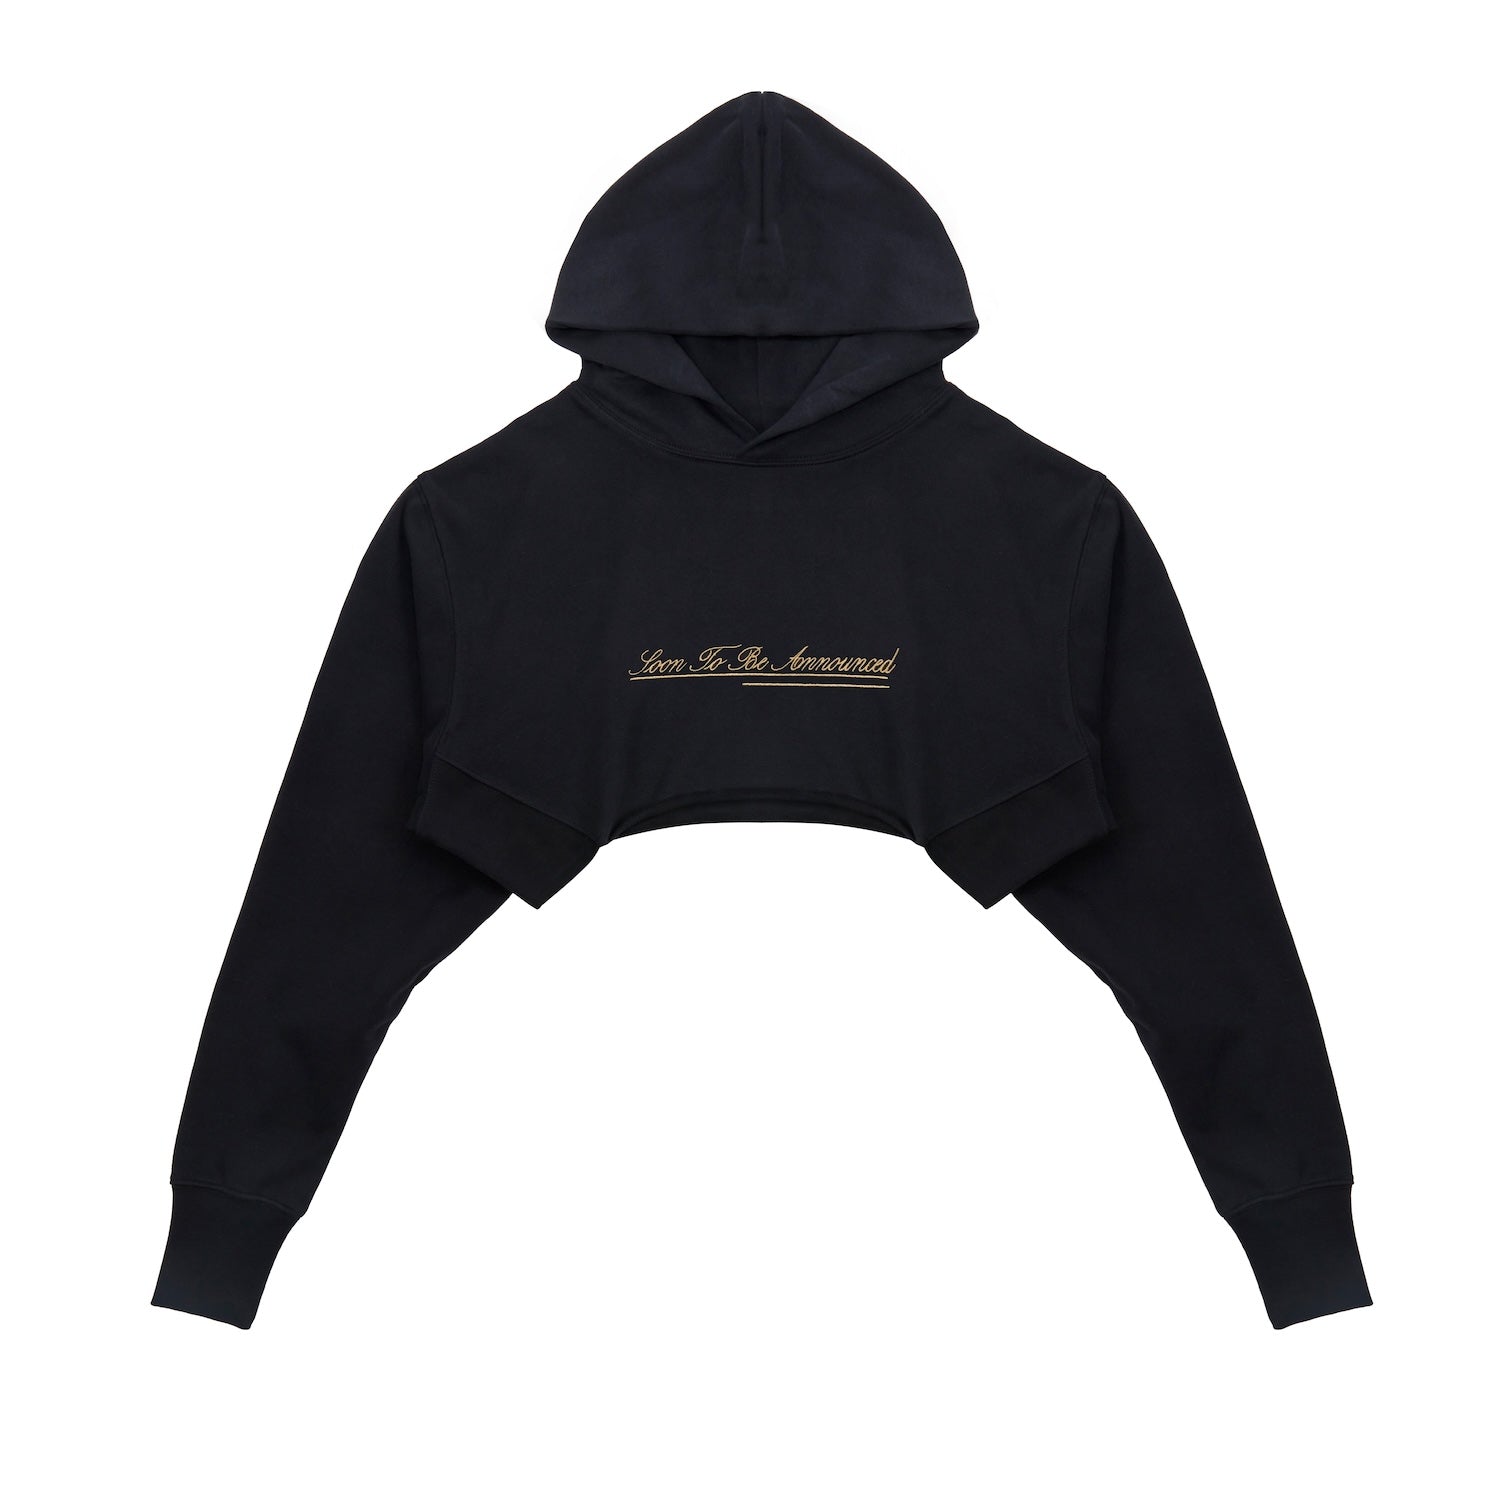 STBA Embroidery Crop Hoodie